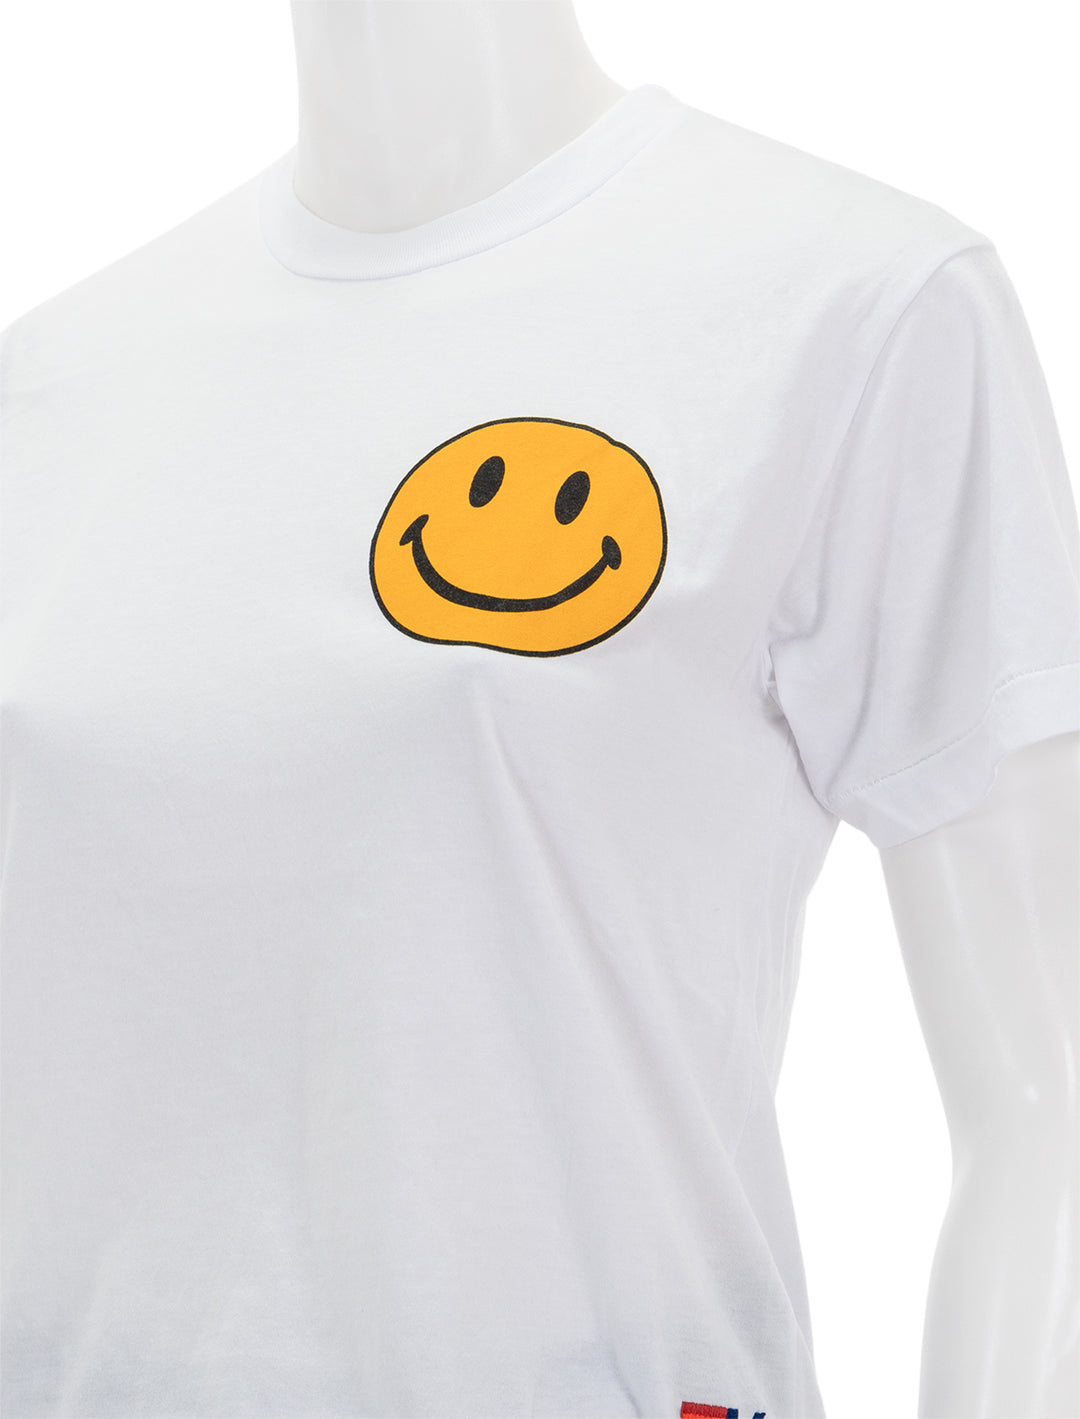 Close-up view of Aviator Nation's smiley 2 boyfriend tee in white.